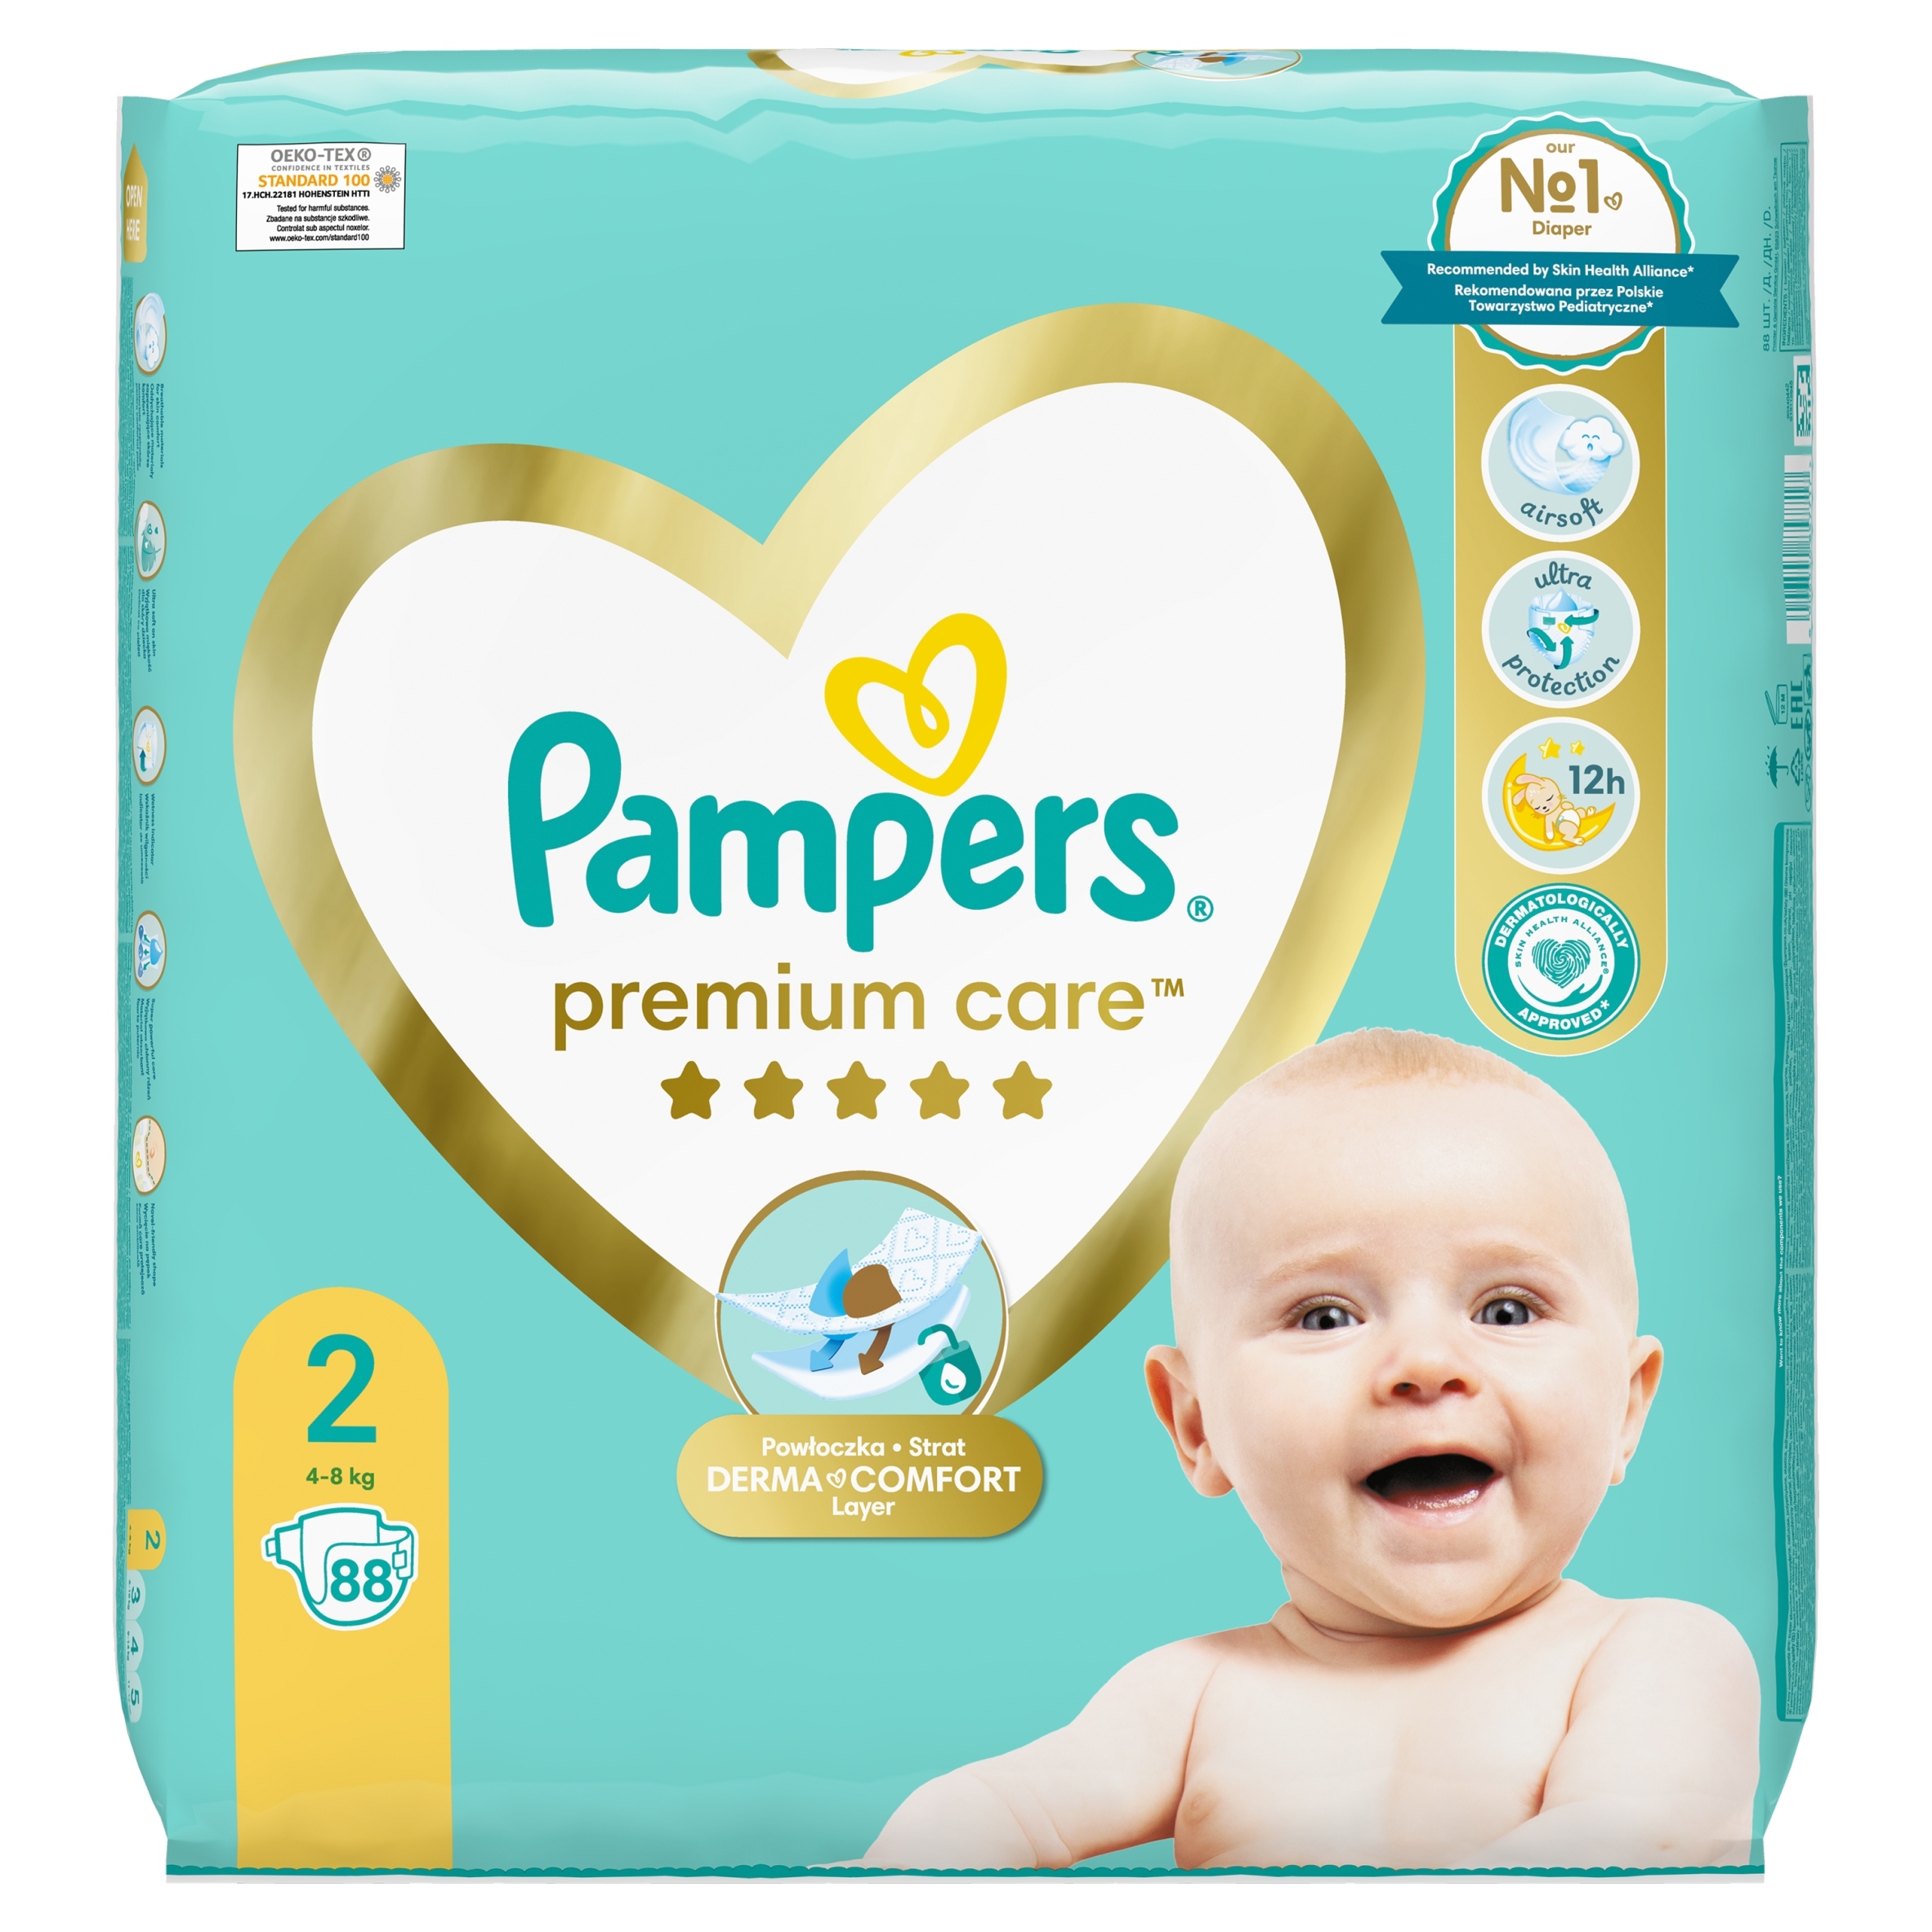 pampers pure diapers reviews